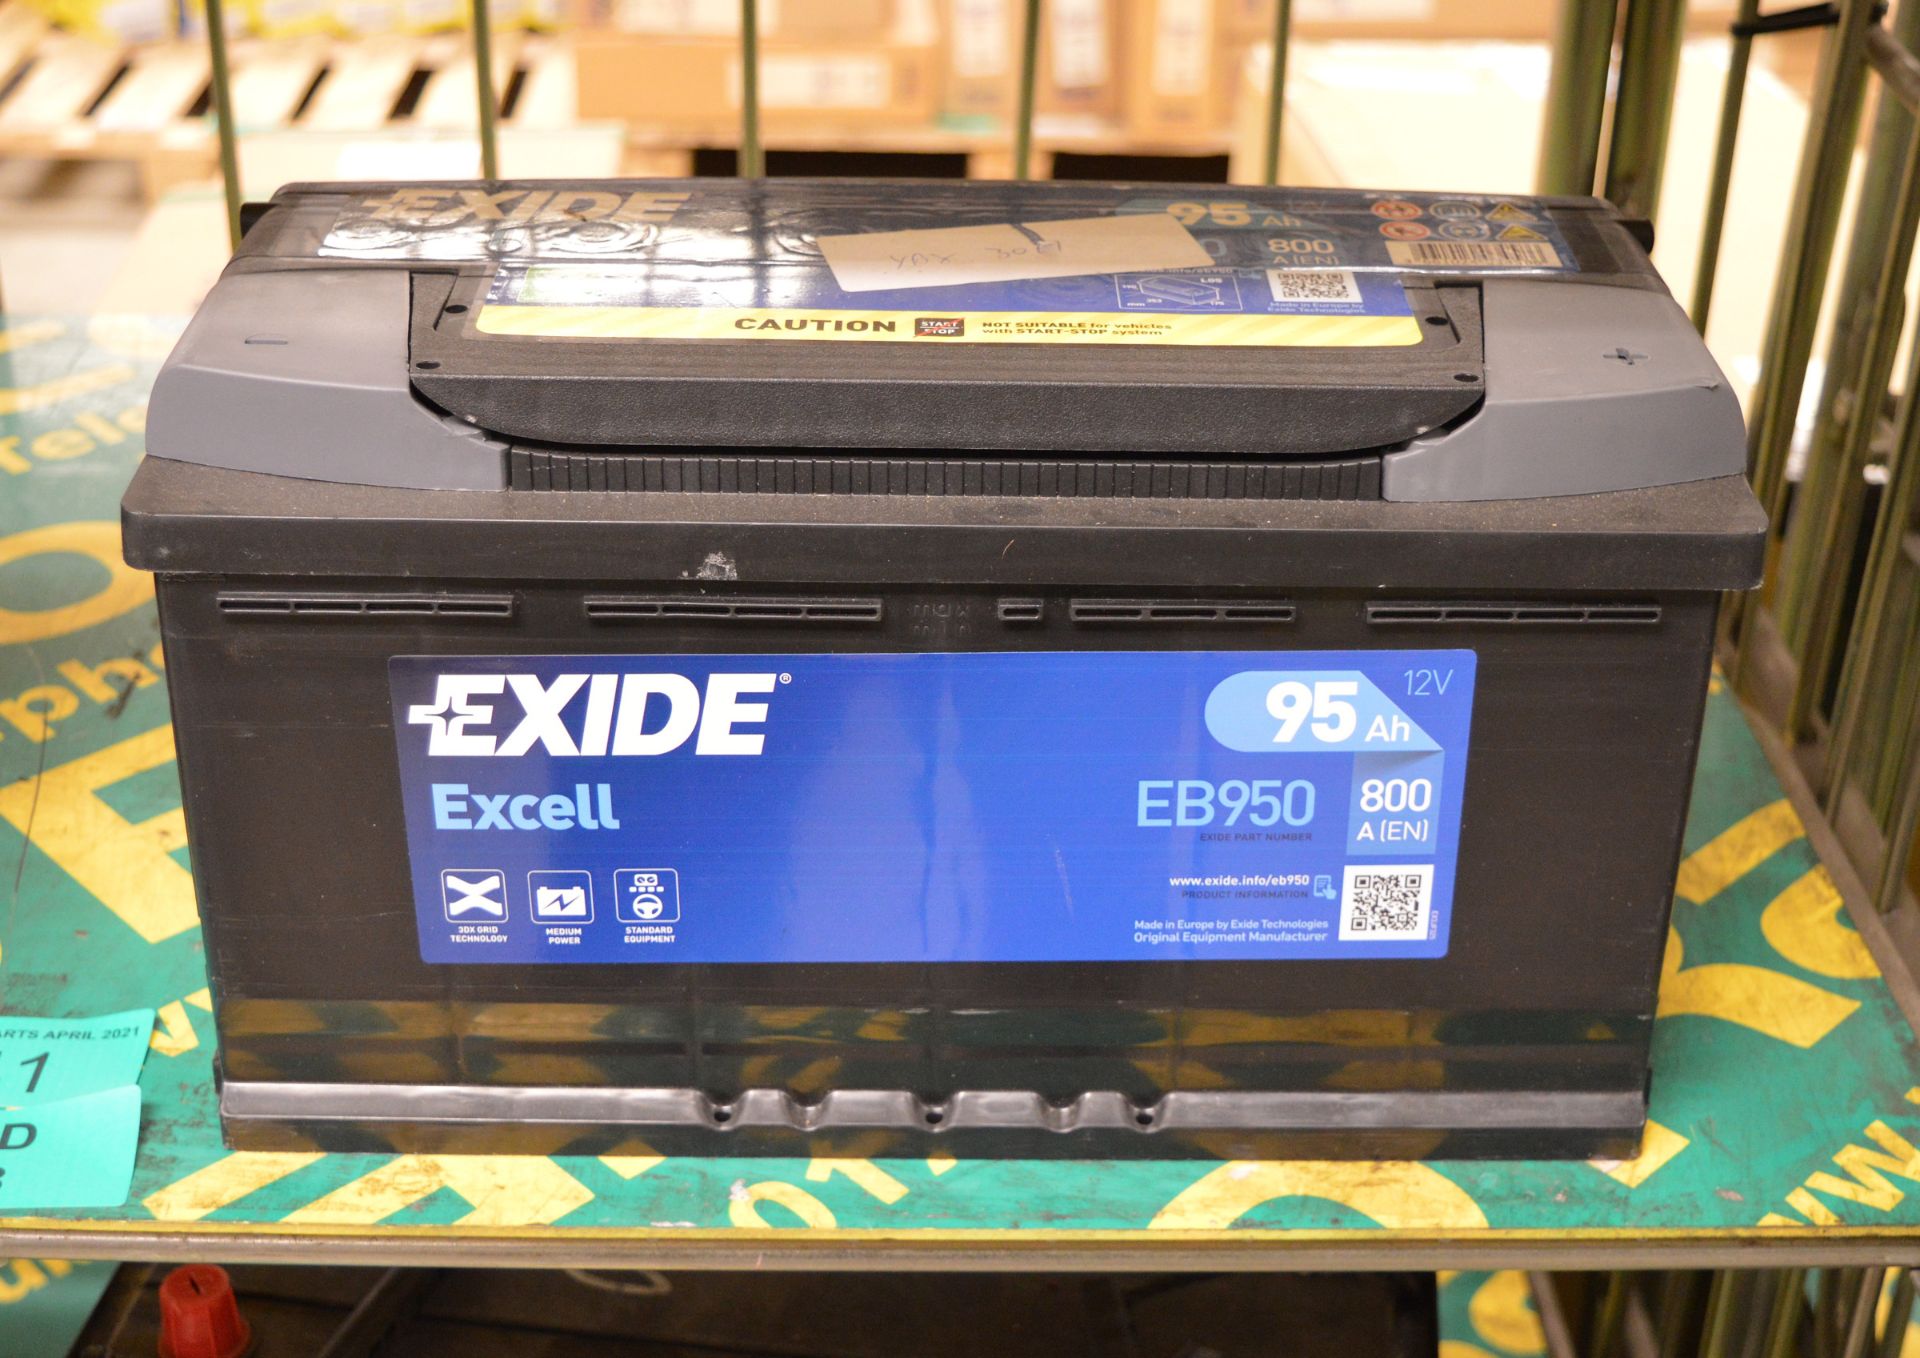 2x Exide Excell EB950 Batteries - Image 3 of 3